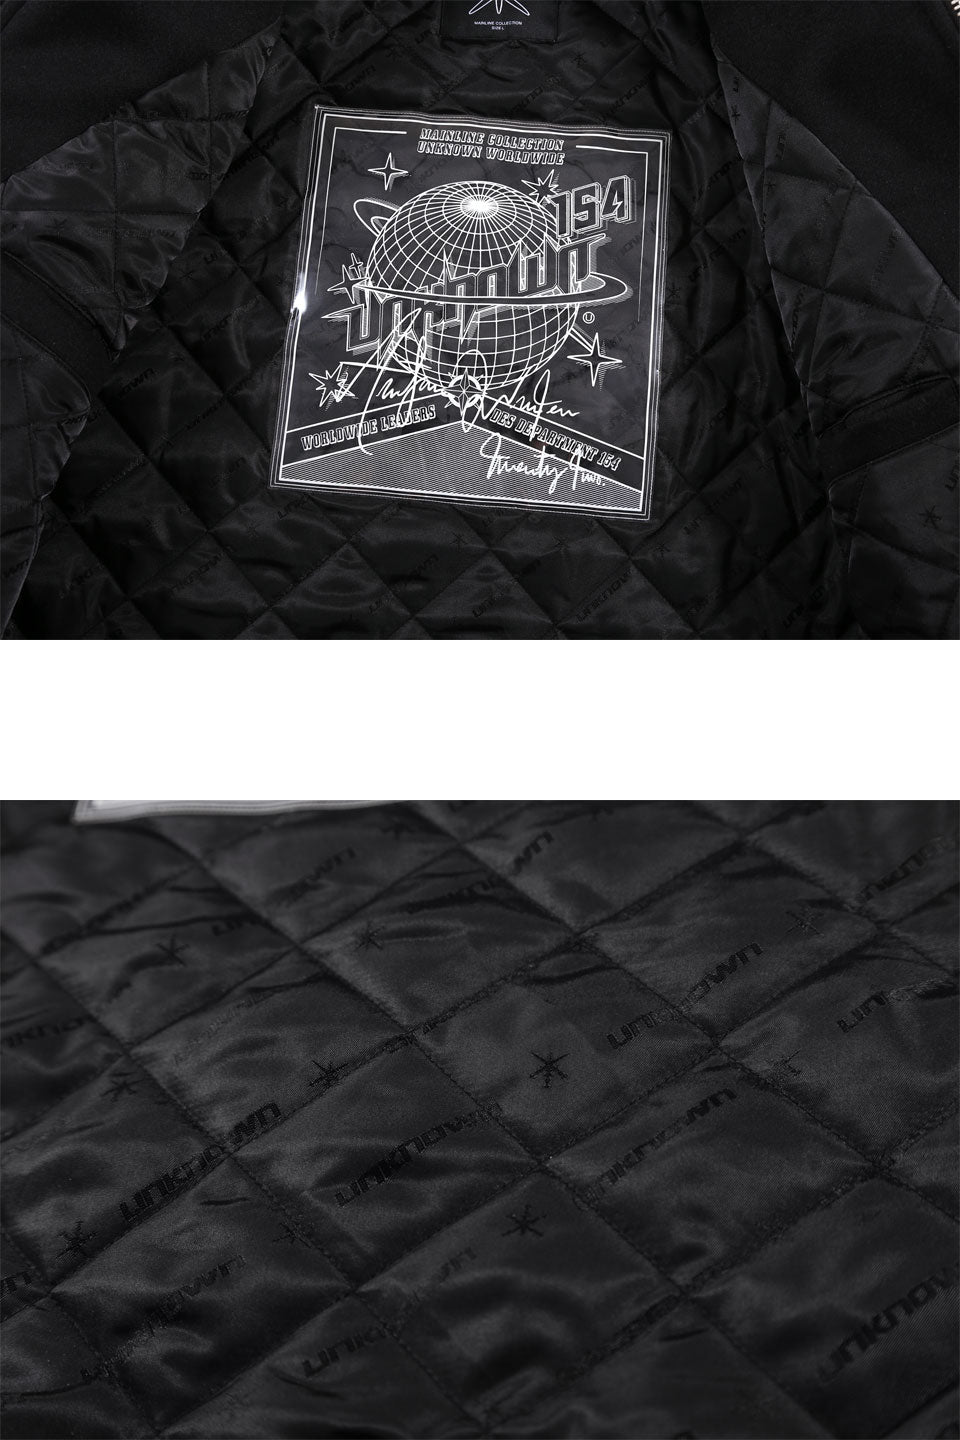 Graphic Patches Varsity Jacket